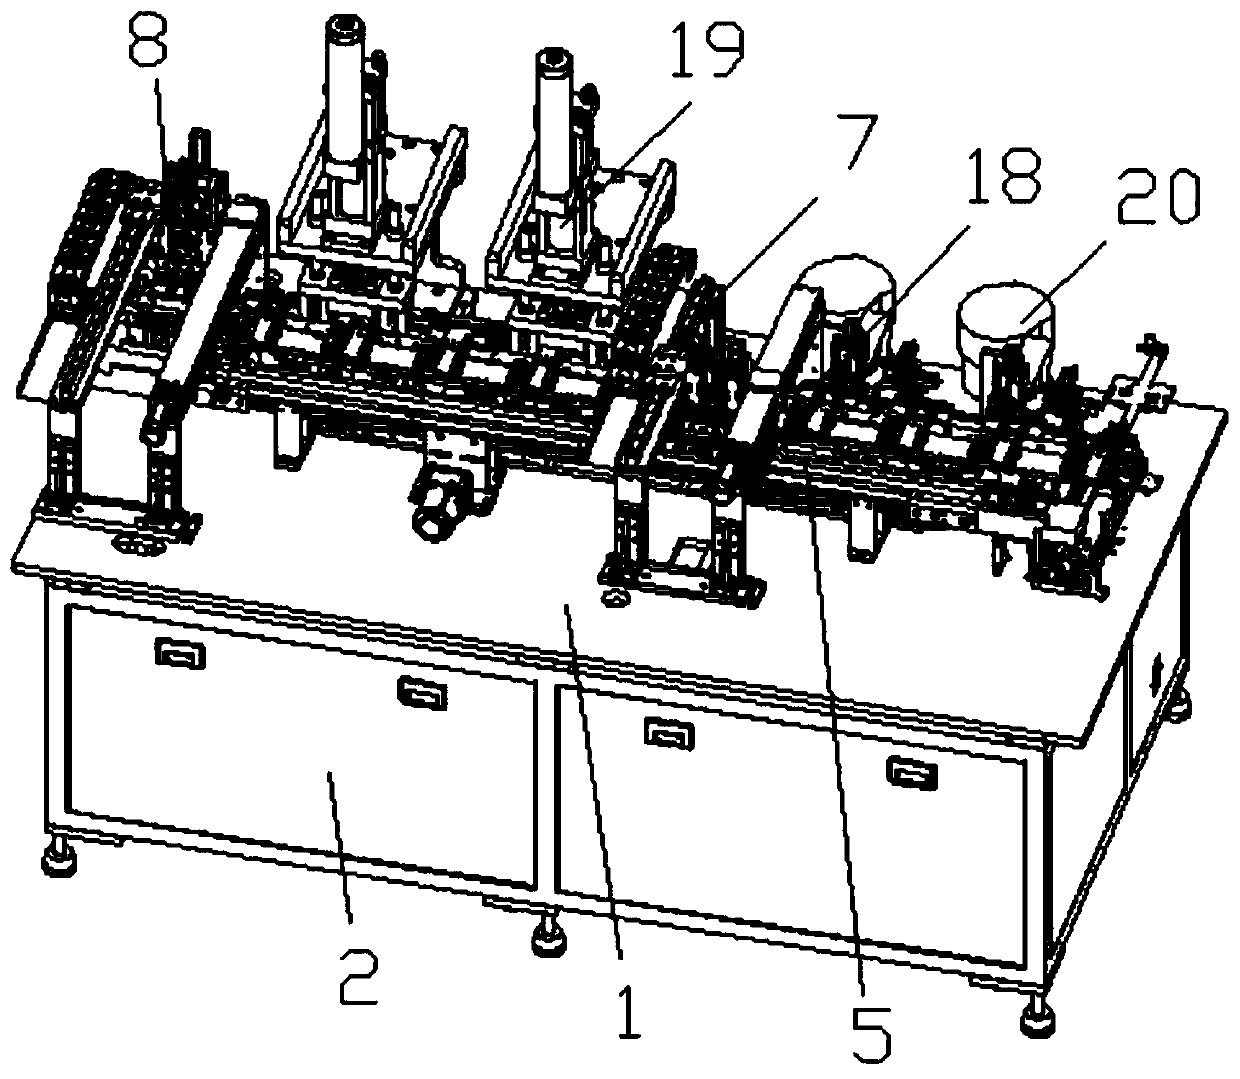 An automatic assembly riveting machine with usb interface